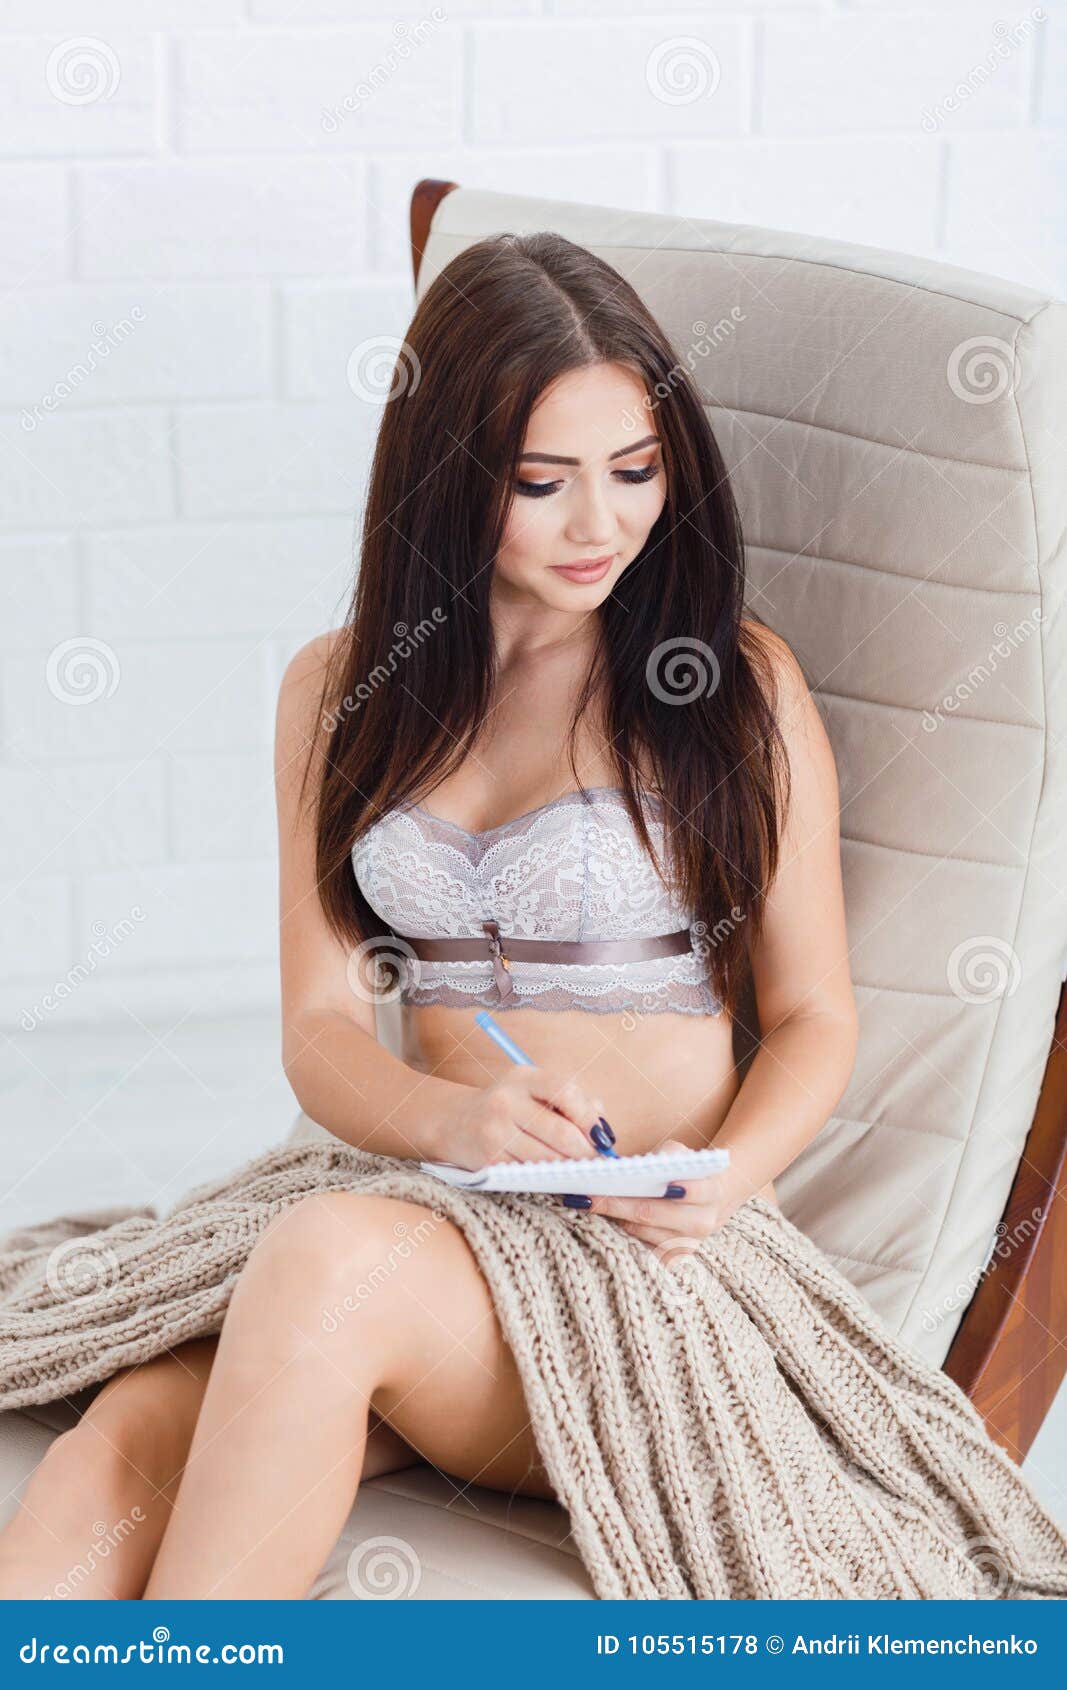 https://thumbs.dreamstime.com/z/cute-young-girl-gray-lace-underwear-posing-camera-beauty-concept-pretty-sexy-woman-sitting-chear-copybook-white-105515178.jpg